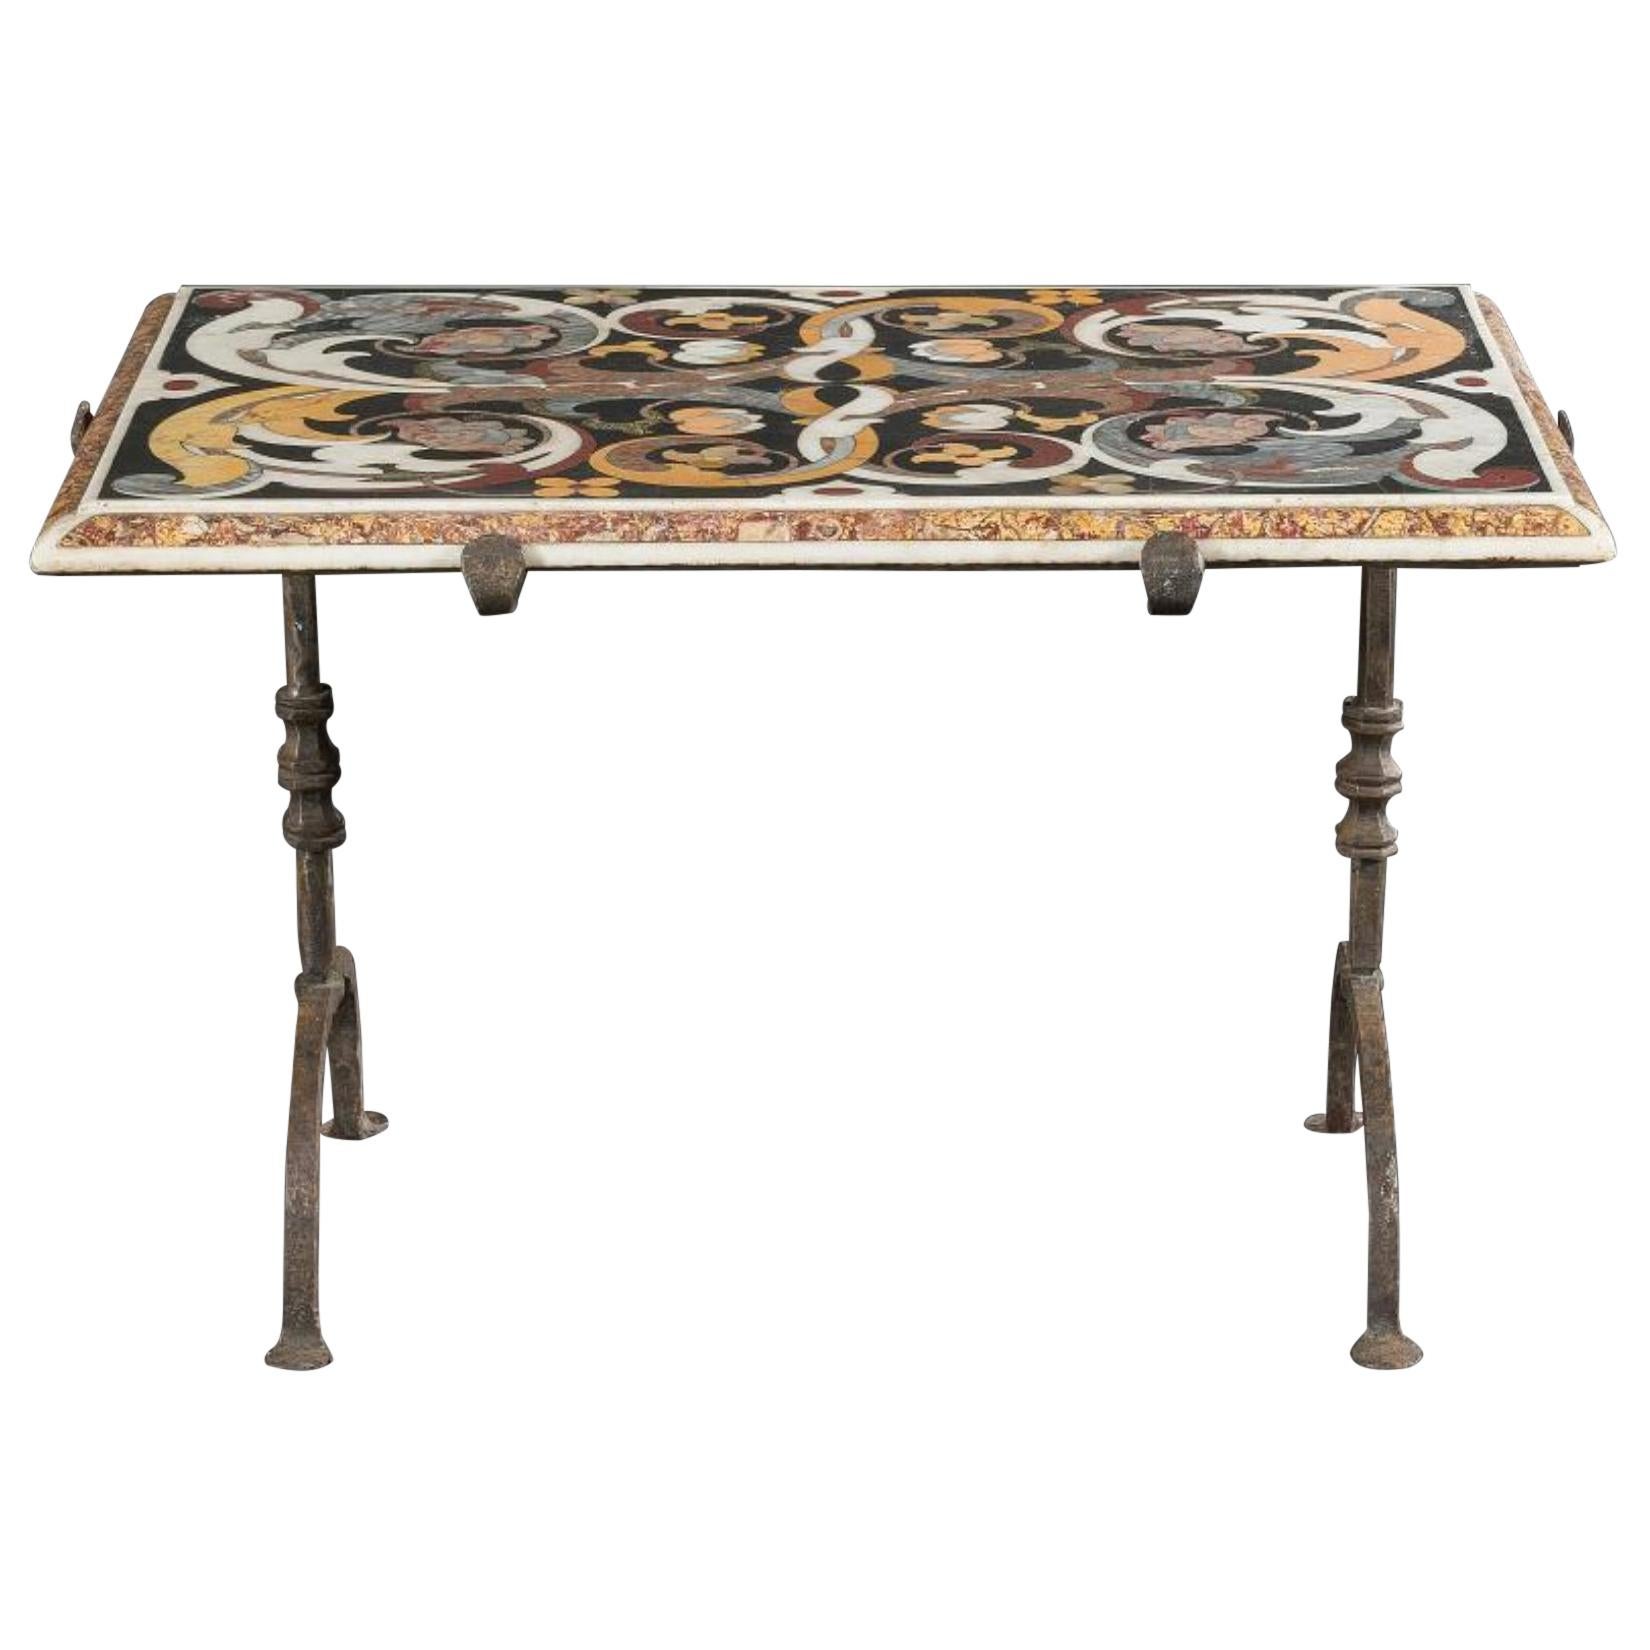 17th Century Italian Handmade Wrought Iron Table Frame with Inlaid Marble Top For Sale